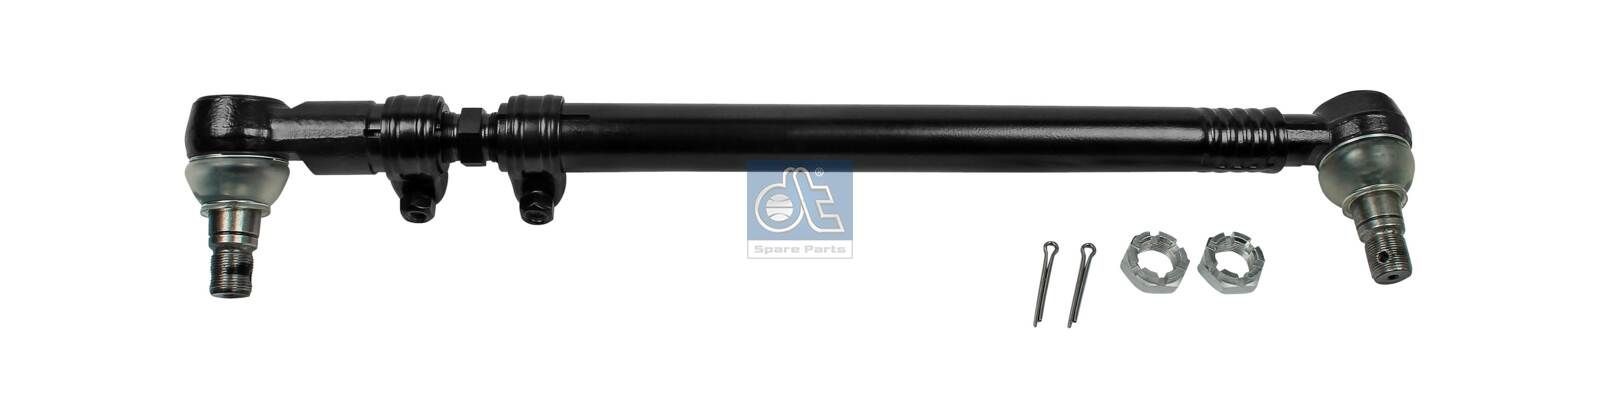 DT Spare Parts 4.65666 Rod Assembly 8.226.328.0000